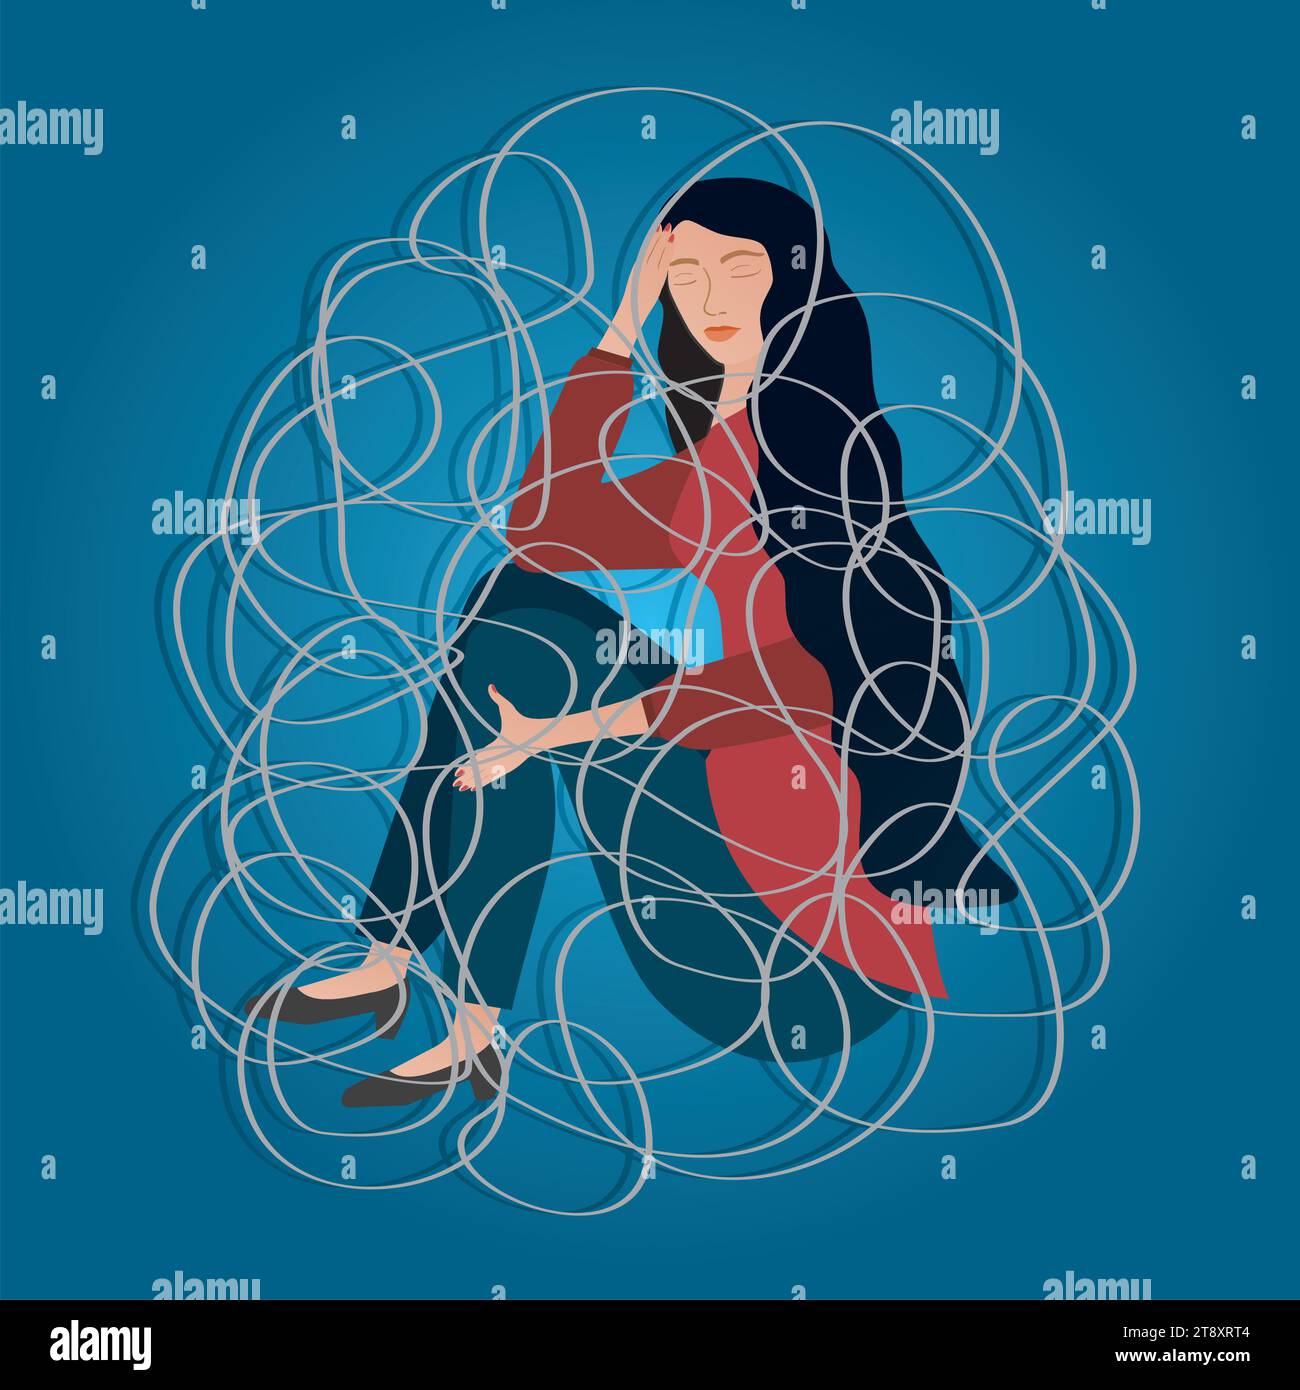 Sad woman, girl sitting in messy life with problems or depression. Square position. Vector illustration. Stock Vector